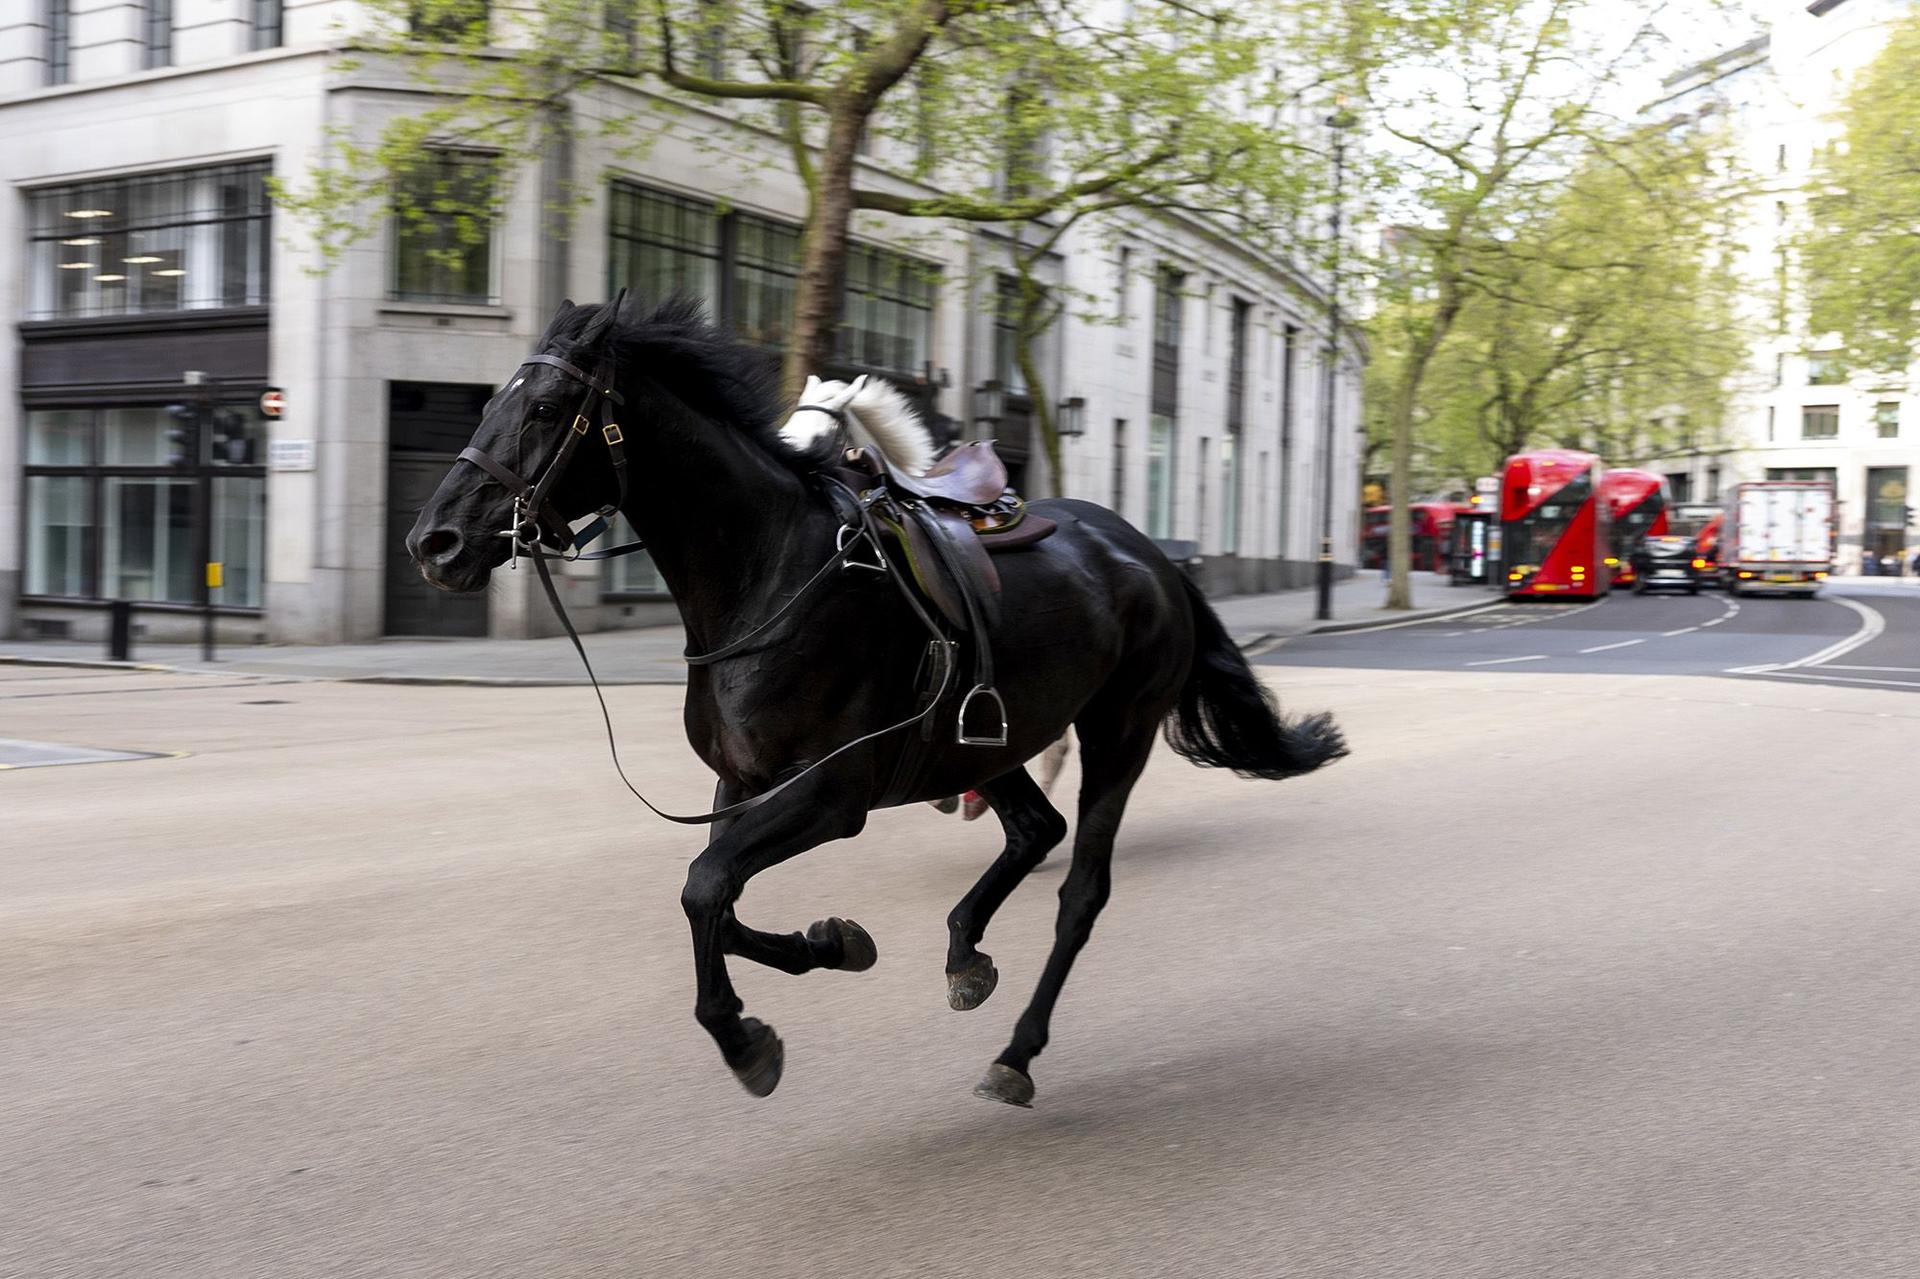 Photo of two horses running through central London